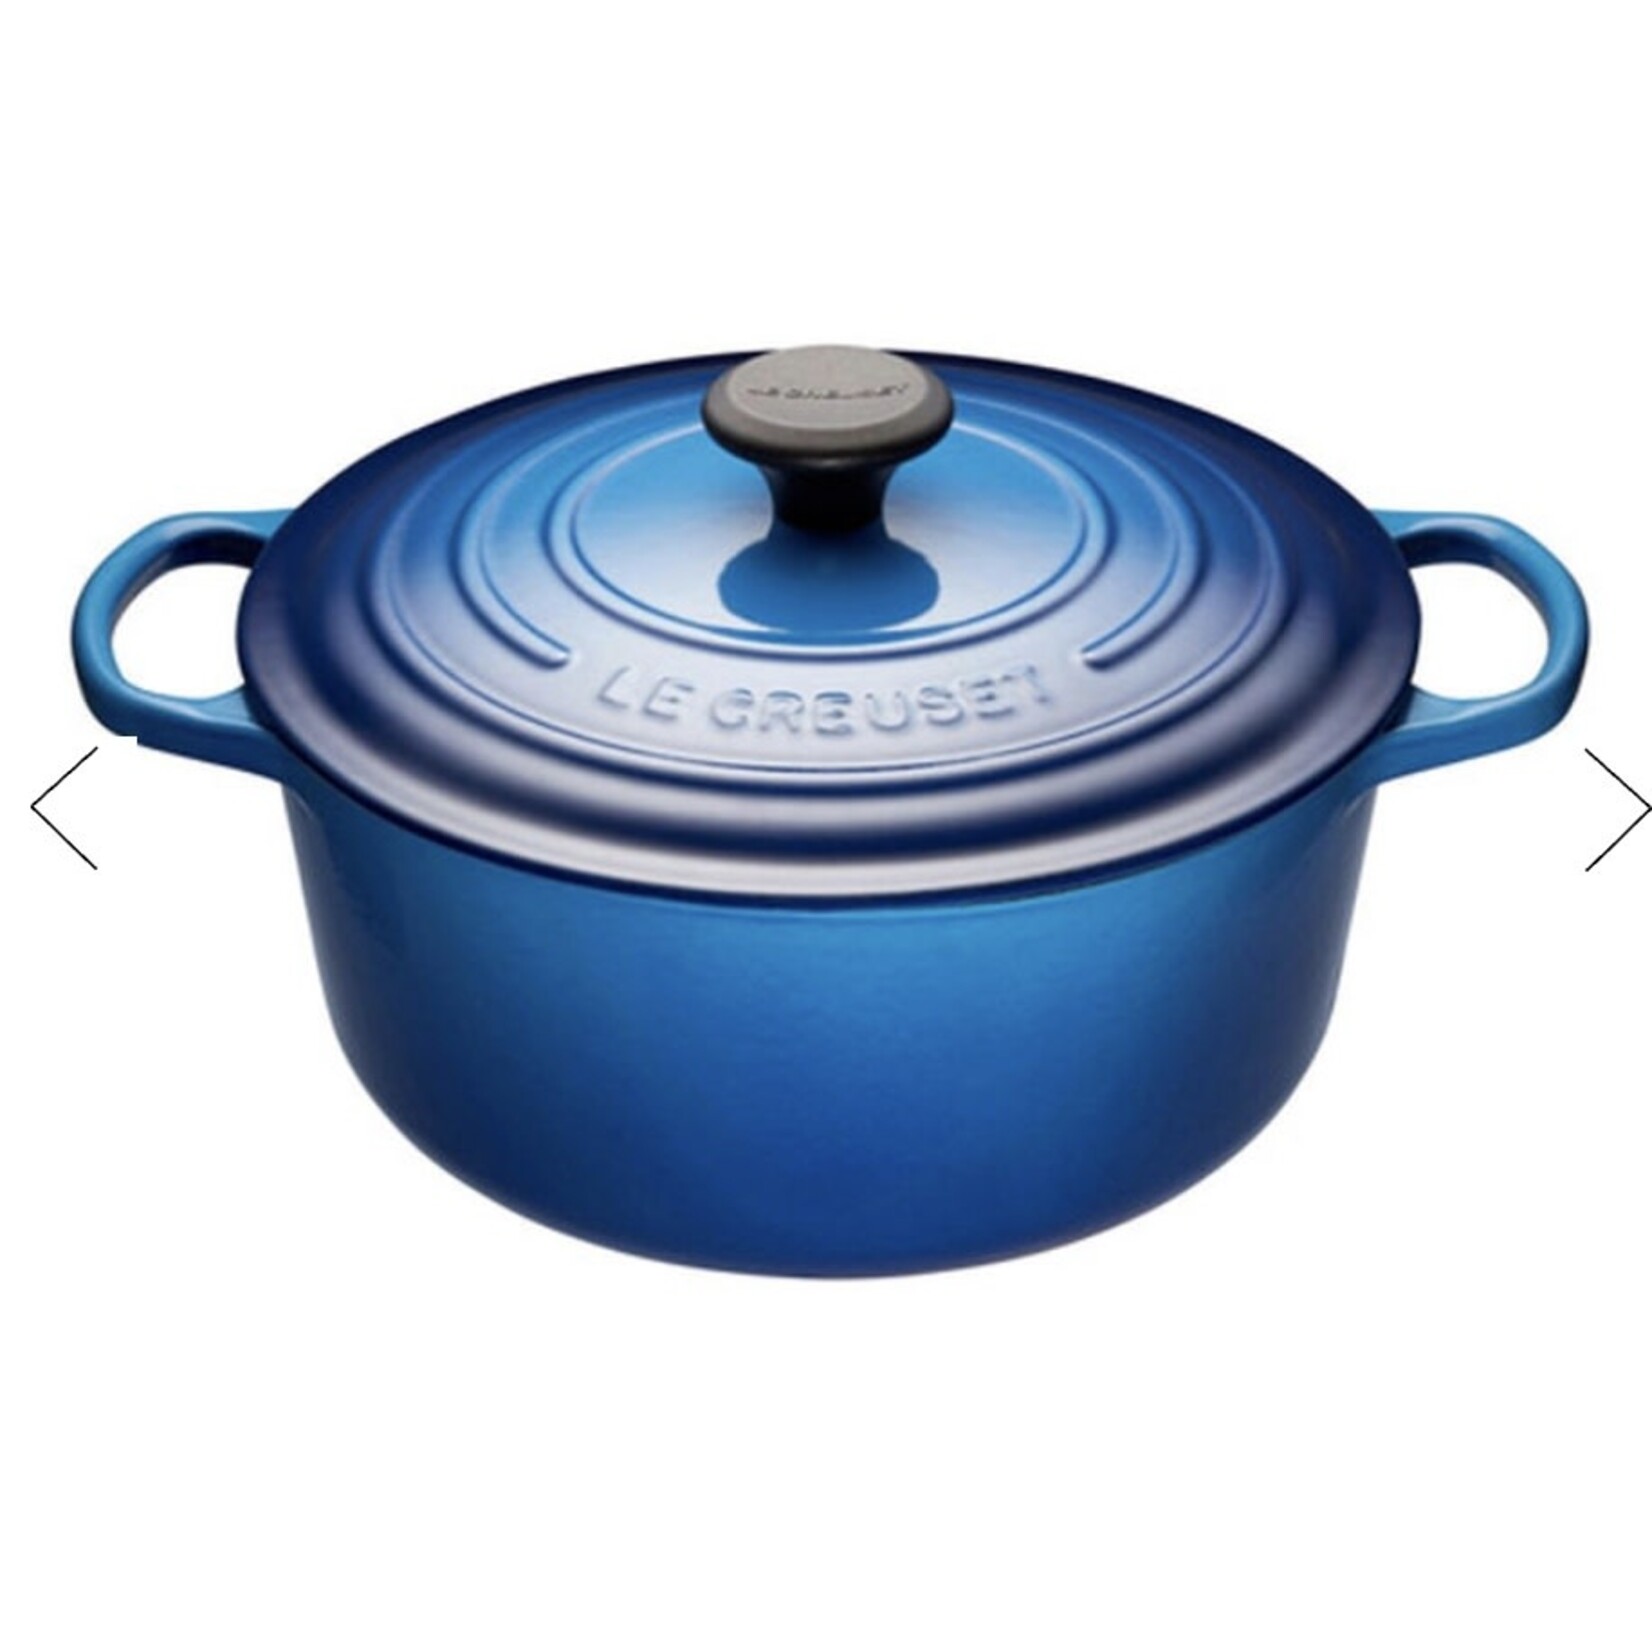 LE CREUSET LE CREUSET Round French Oven 4.1L - Blueberry